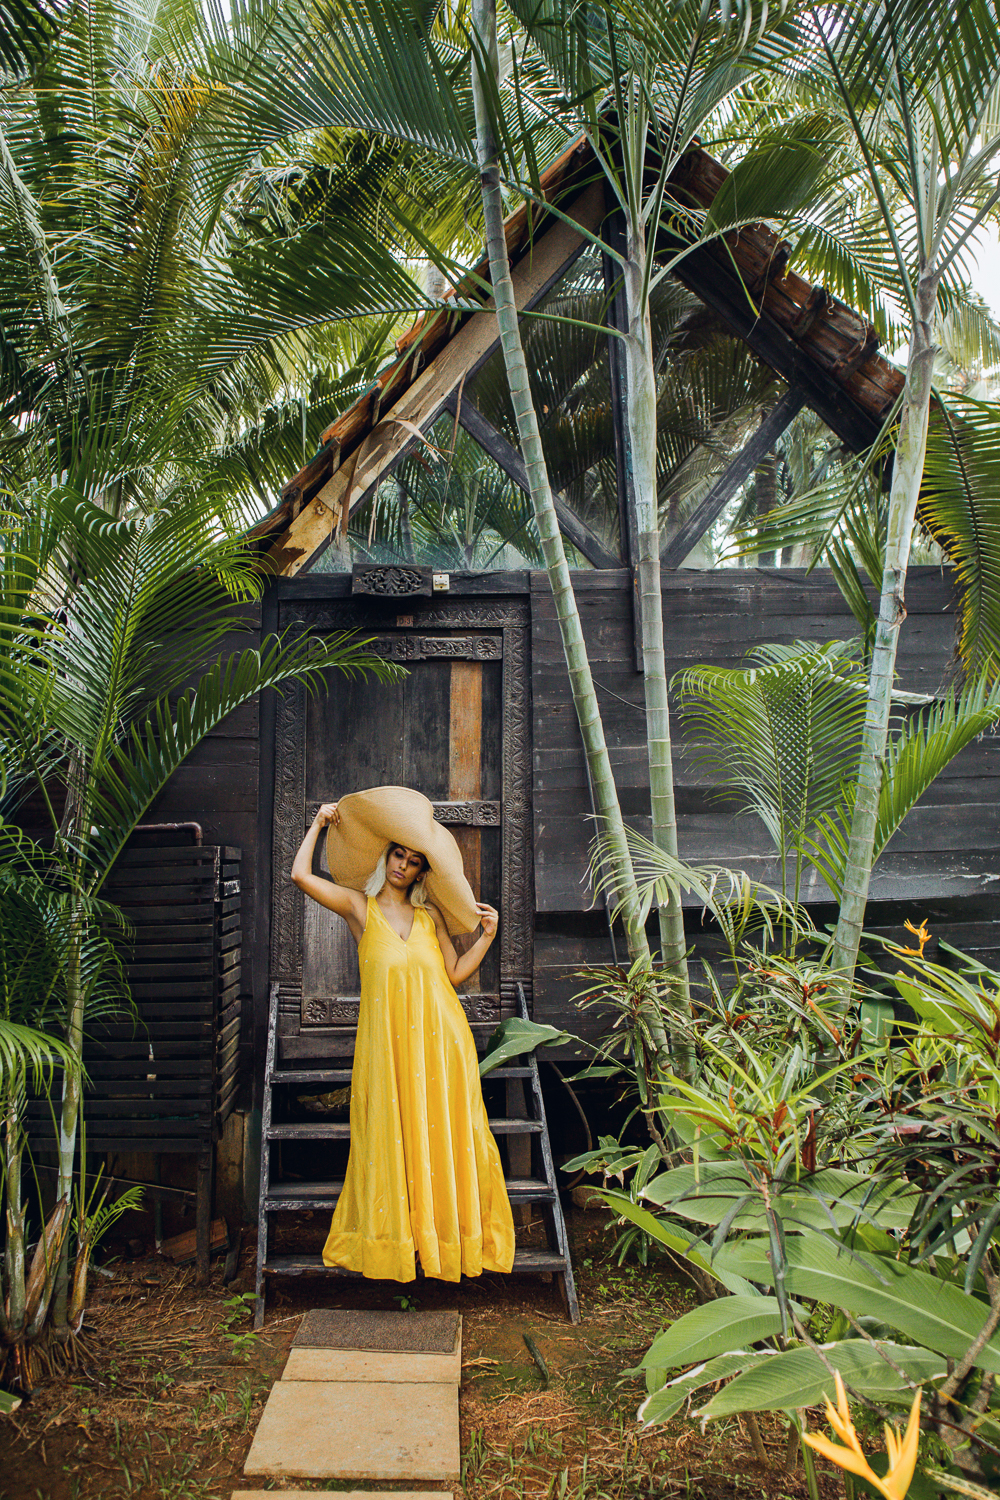 Nicobar Dress , Goa Fashion , Boho ; Yello maxi ; Leela Cottages ; Goa ; Summer Getaway ; Travel ; Ashwem Beach ; Sea view ; By the Ocean ; Cottage Life ; Bohemian look,  Bright Colors ; straw hat  ; Palm Trees ; Nature Lover ; Slow living ; photography ;  Naznin ; Naznin Suhaer  ; indian blogger ; hyderabad fashion bloggers ; hyderabad bloggers ; hyderabad fashion blogger ; I Dress for the Applause ; Hyderabad ; 